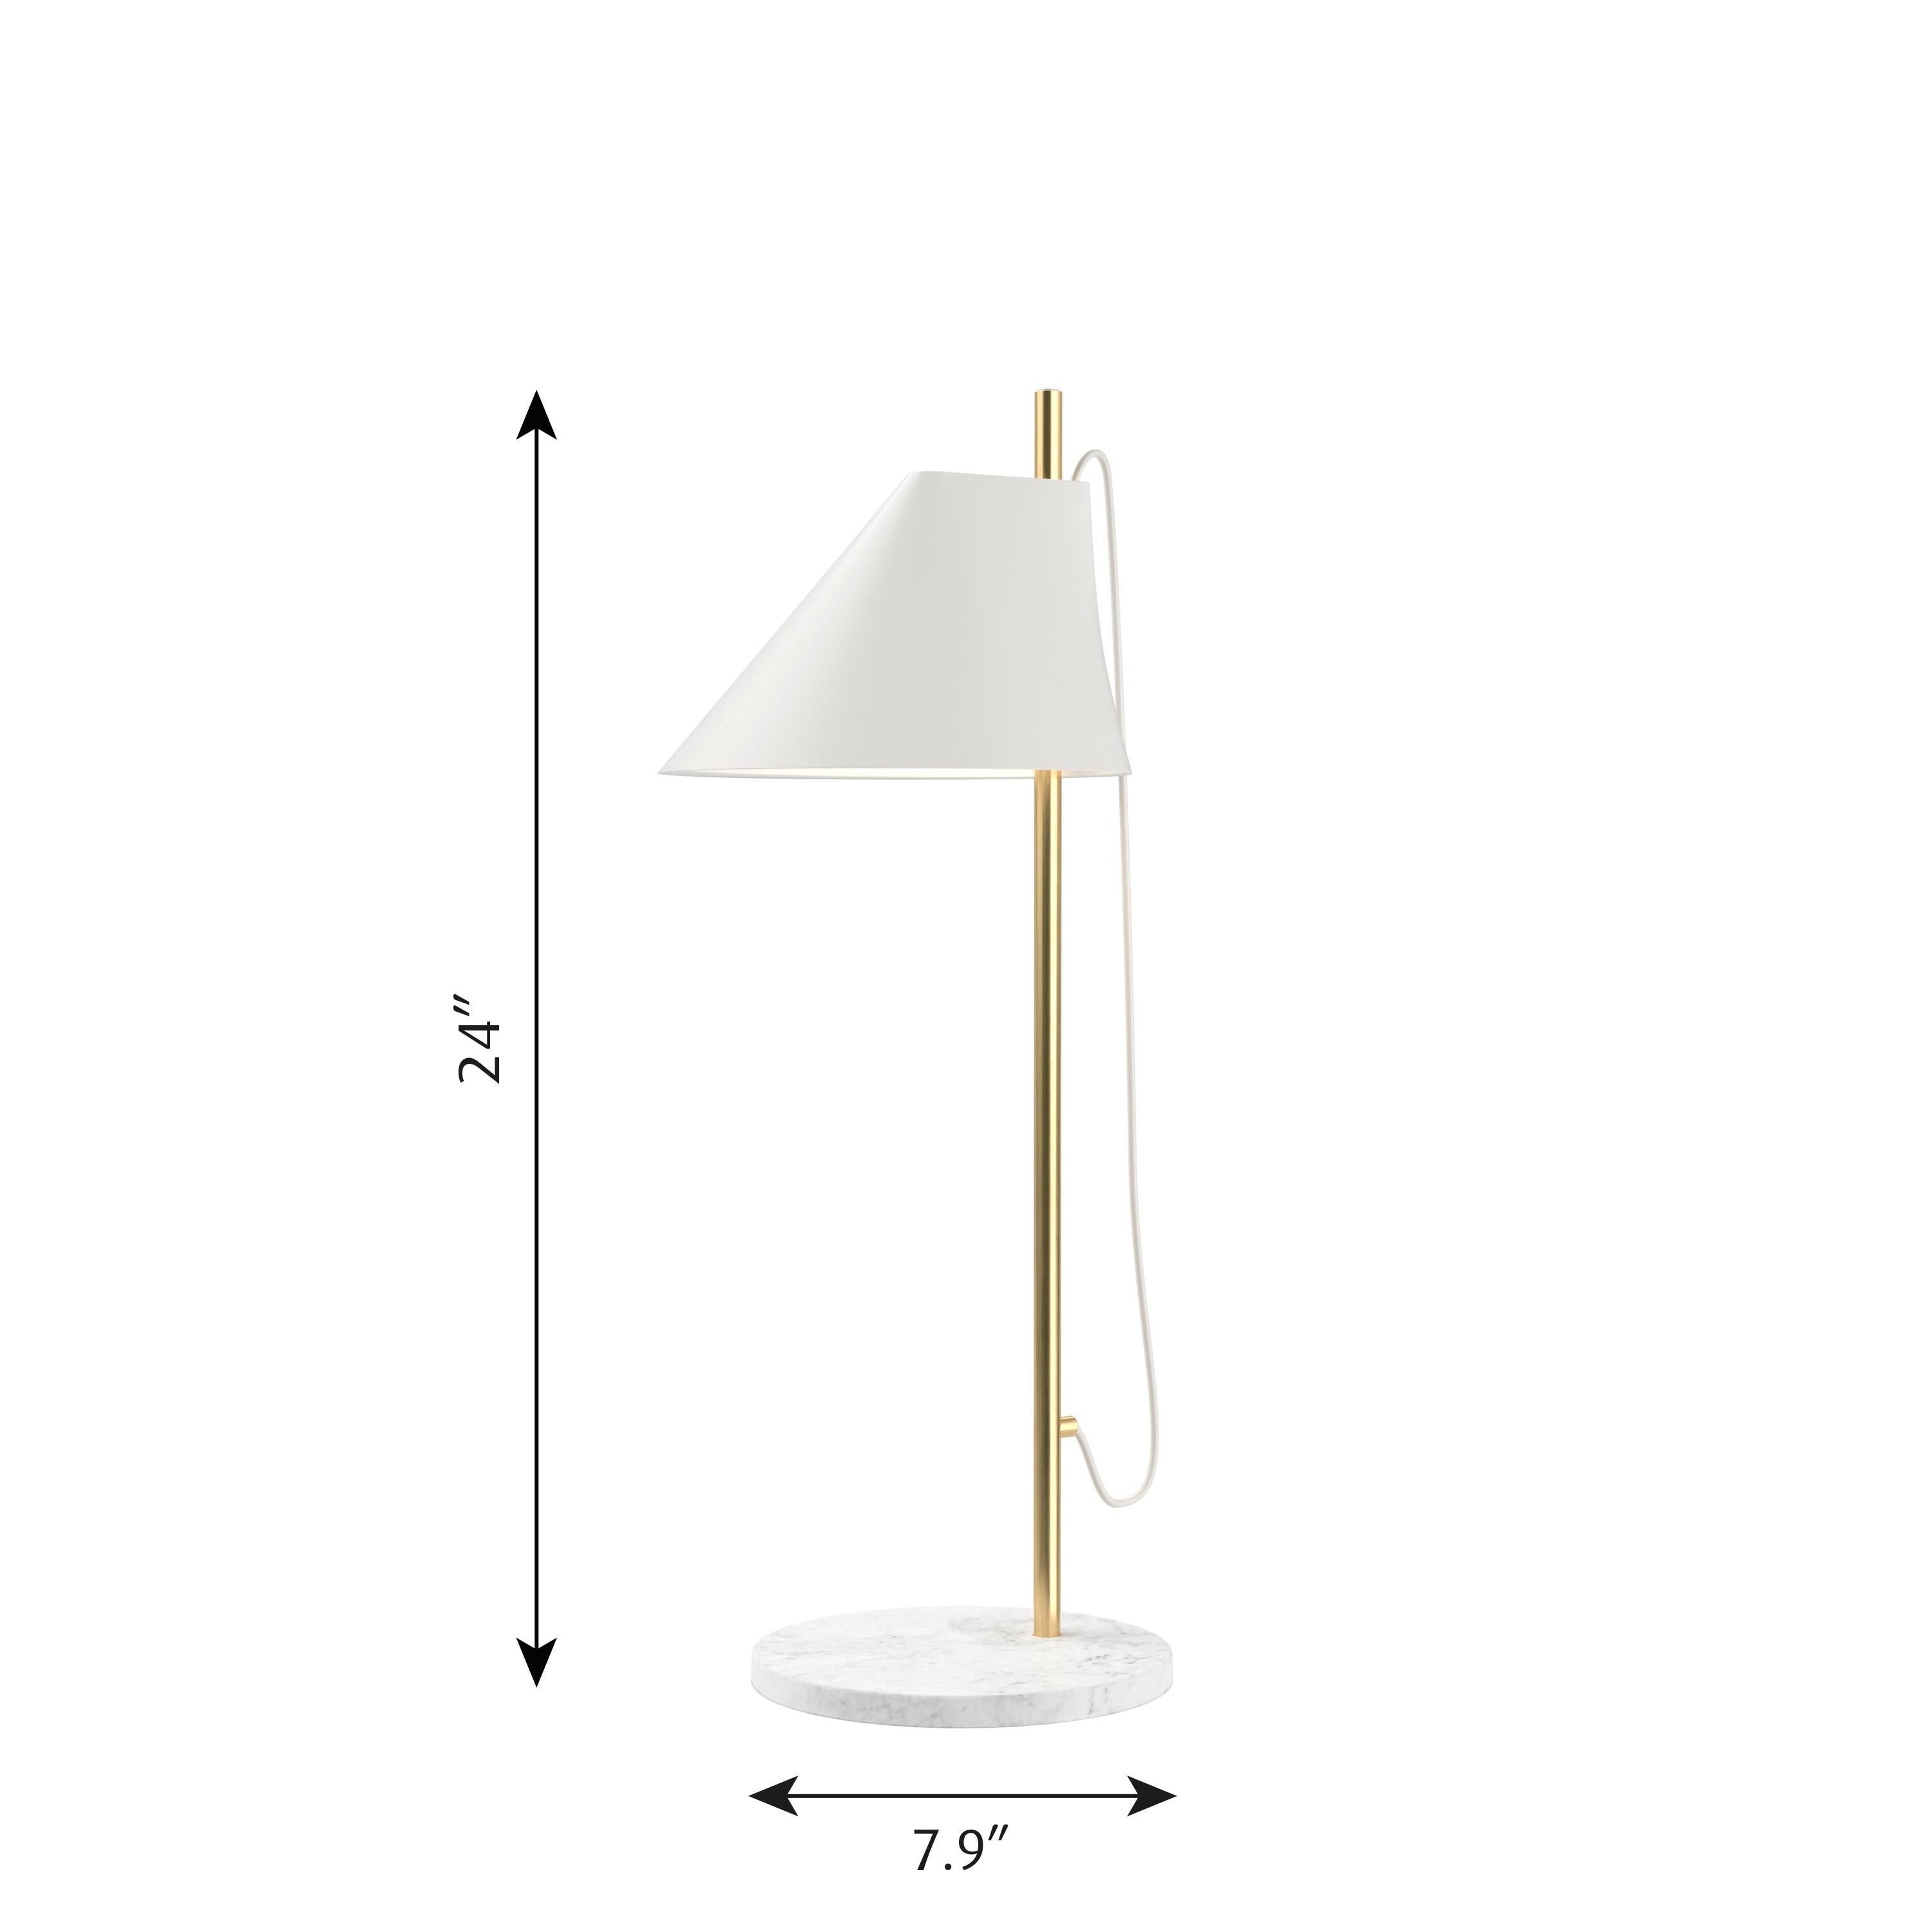 Gamfratesi white brass and marble 'Yuh' table lamp for Louis Poulsen. Designed by Stine Gam and Enrico Fratesi, the Yuh reflects Louis Poulsen’s philosophy of designing to shape light. Inspired by the Classic virtues of Danish Modernism, Poul